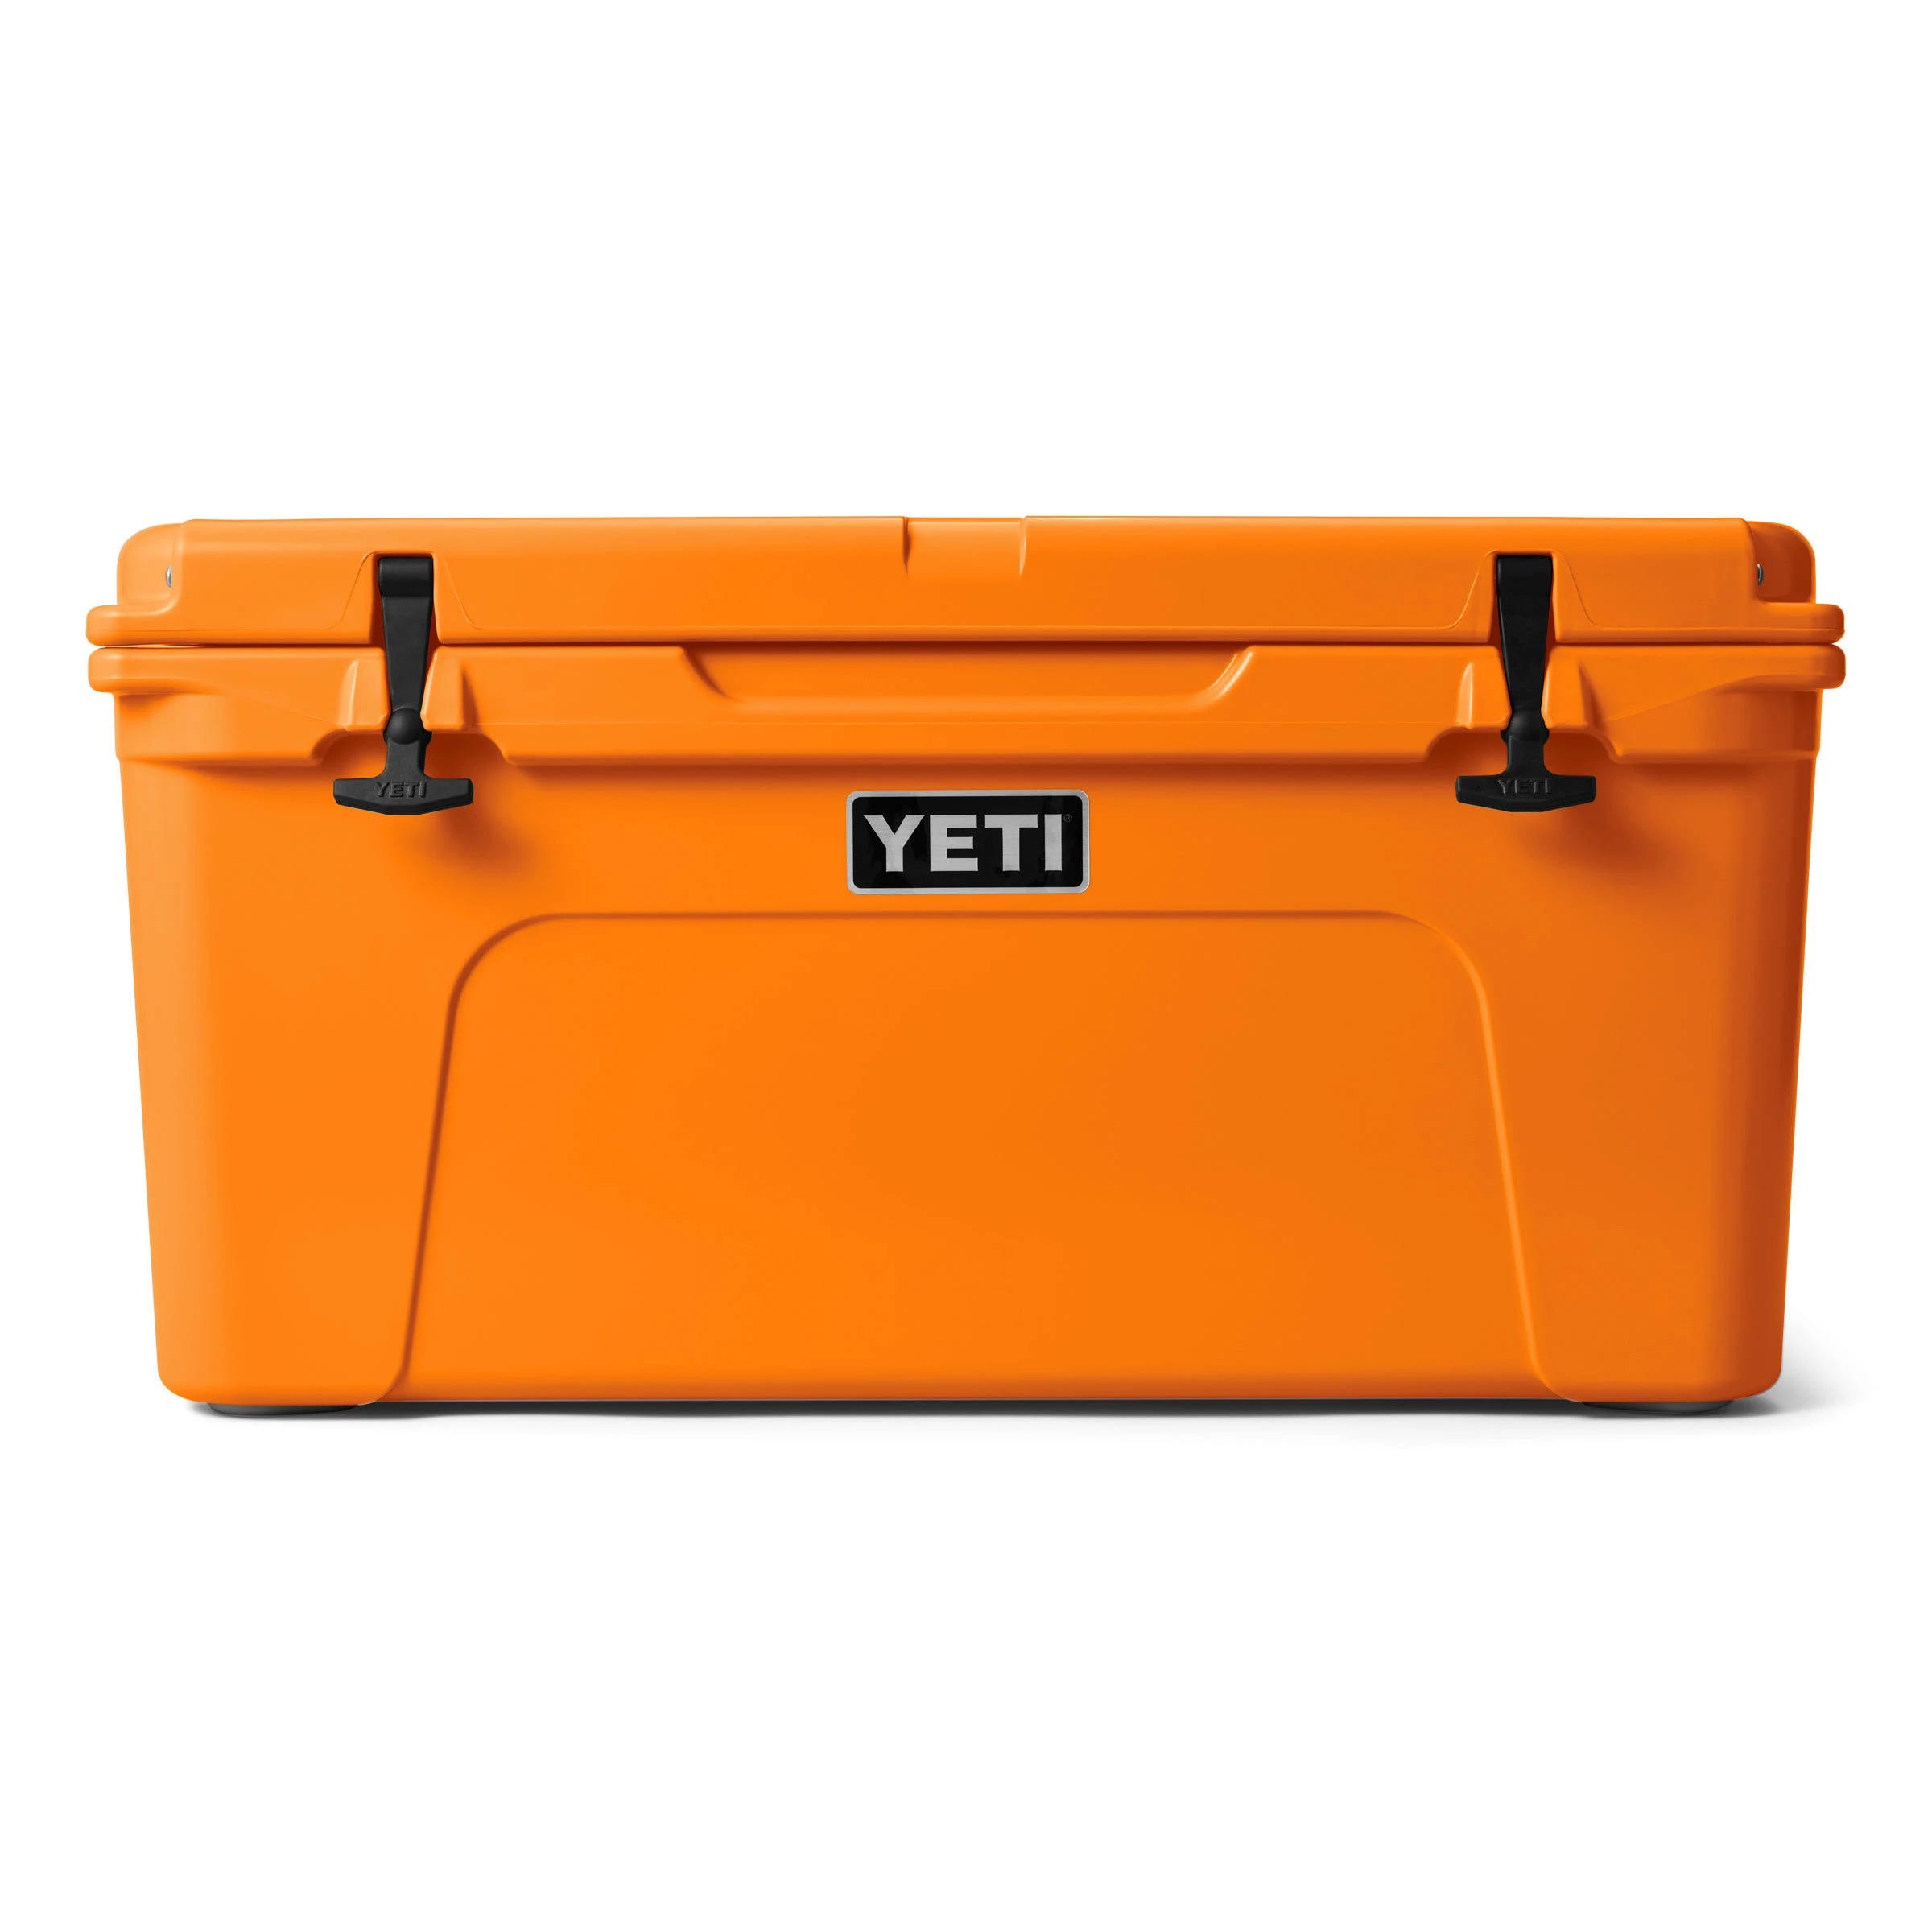 Yeti Tundra 65 Cooler - Ultimate Outdoor Insulated Ice Chest | Image